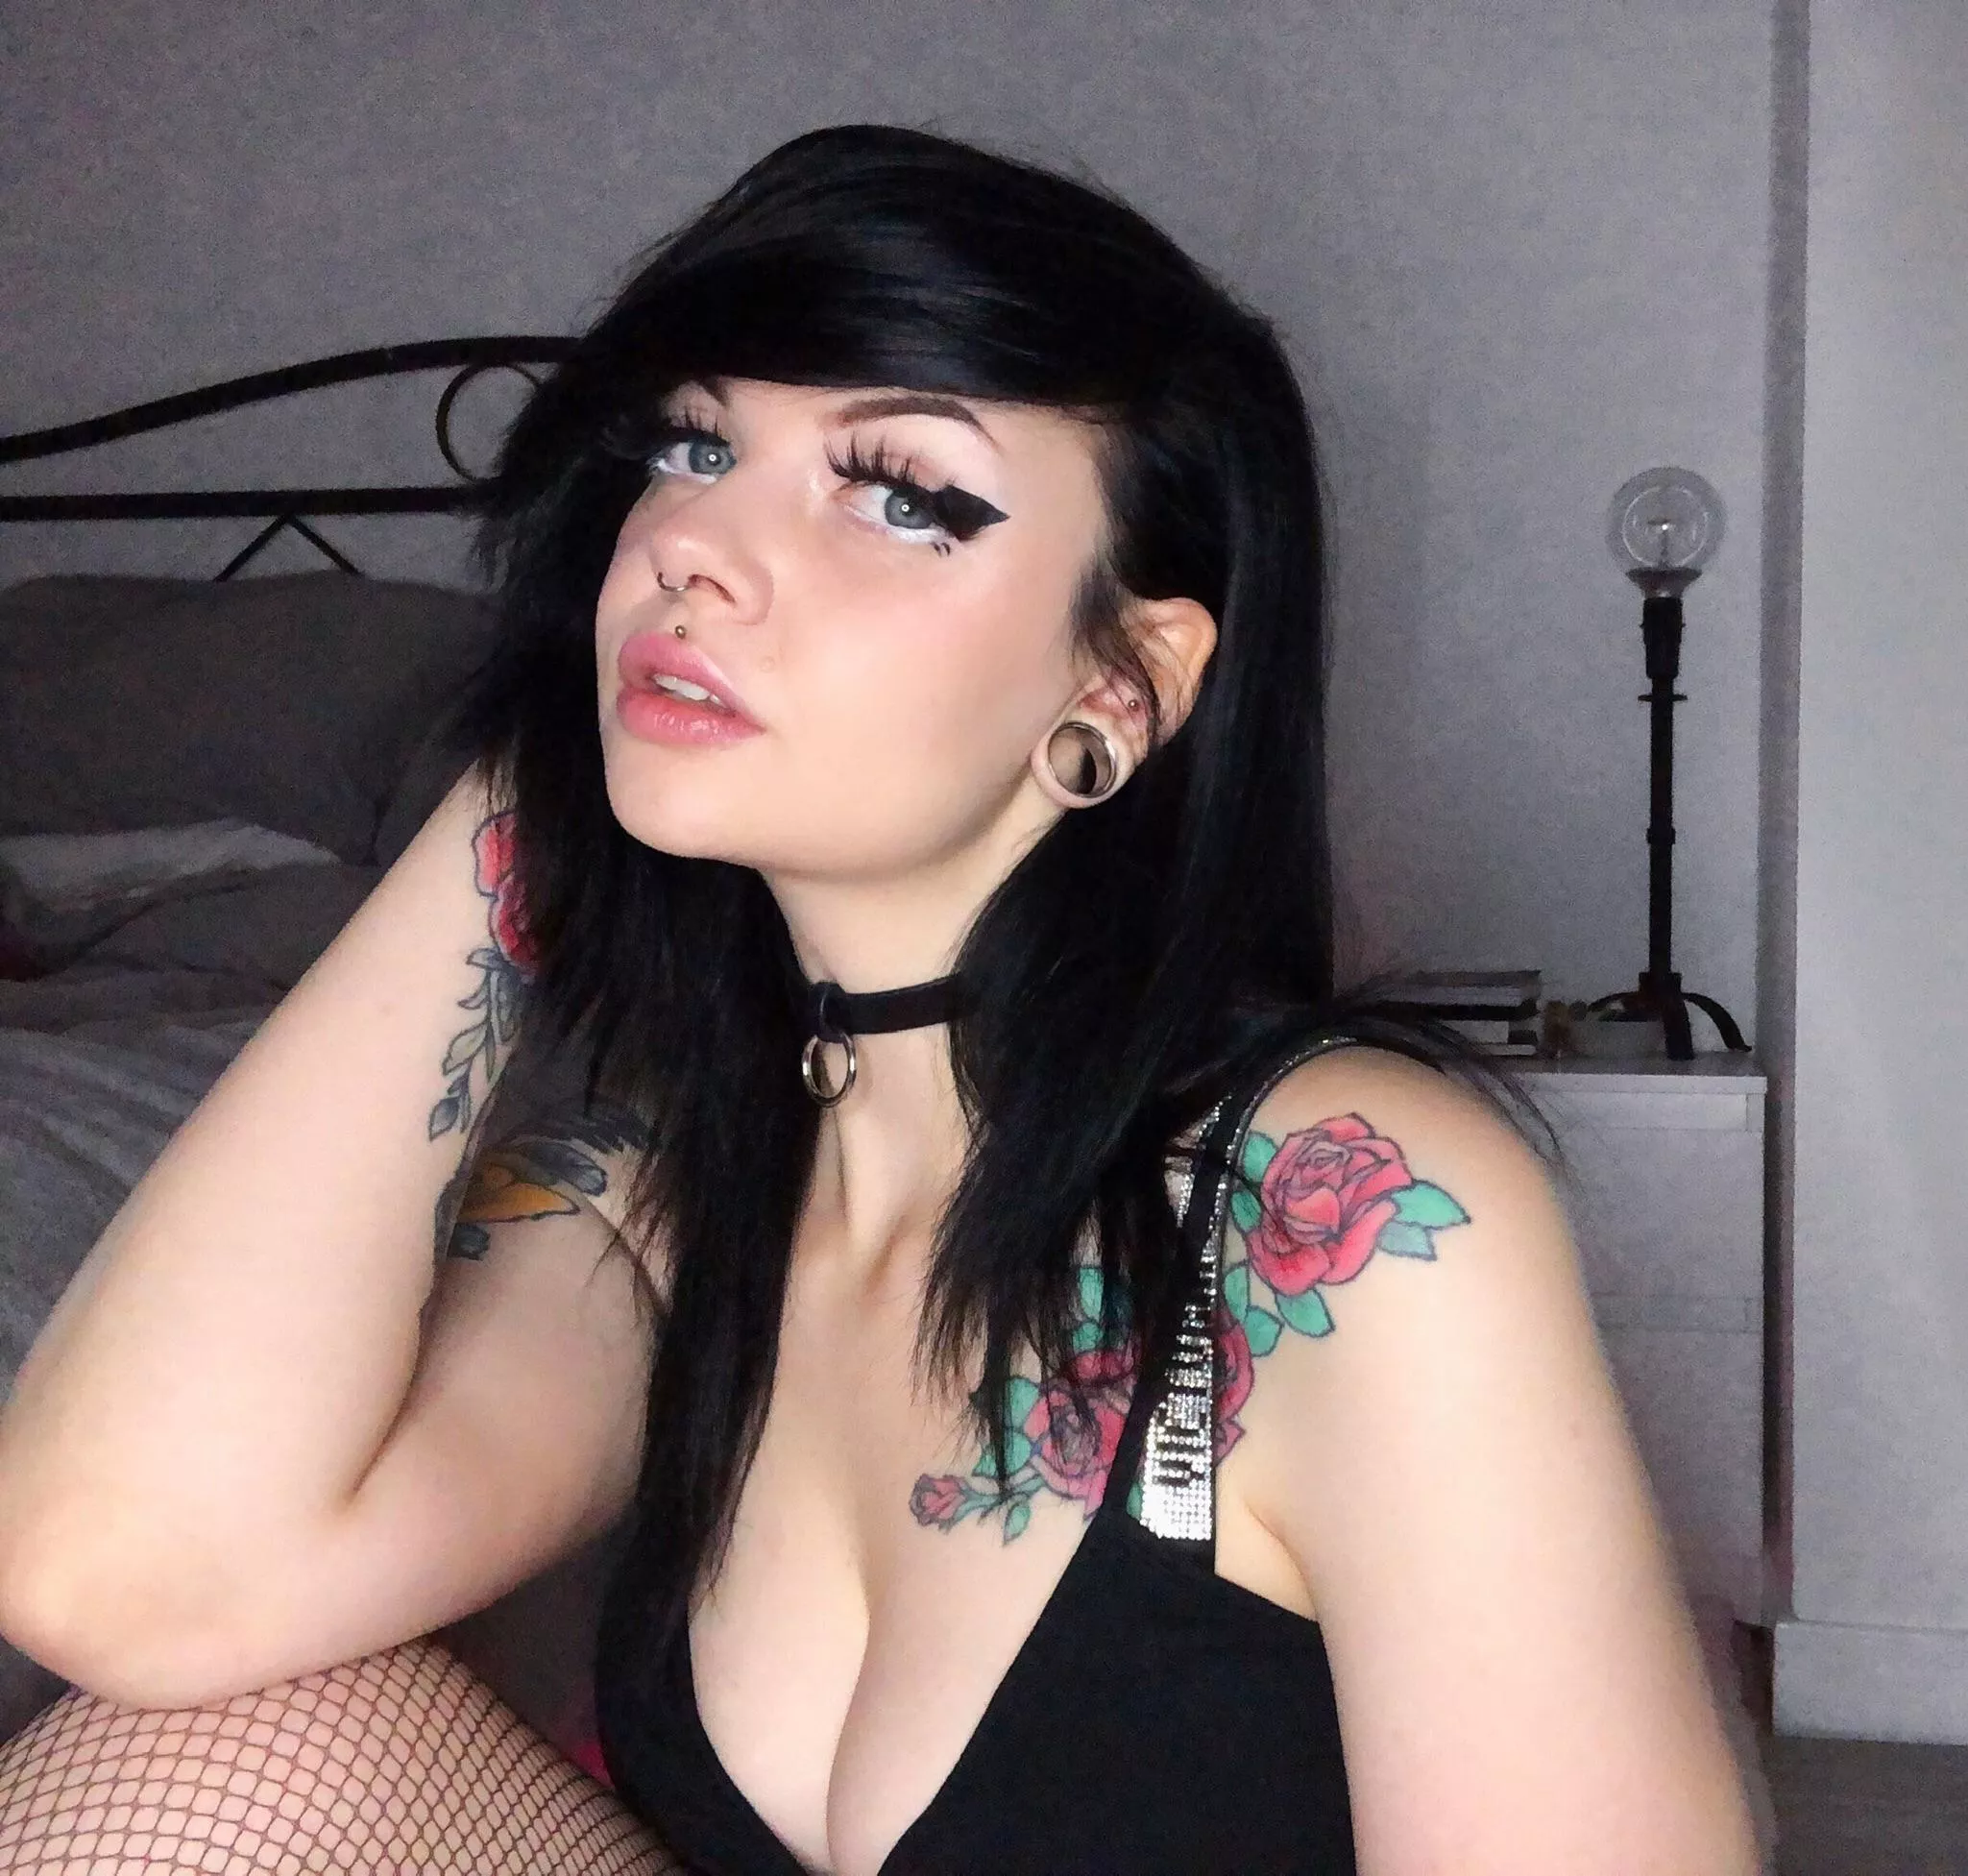 emo girls streaming porn sites sexy photo